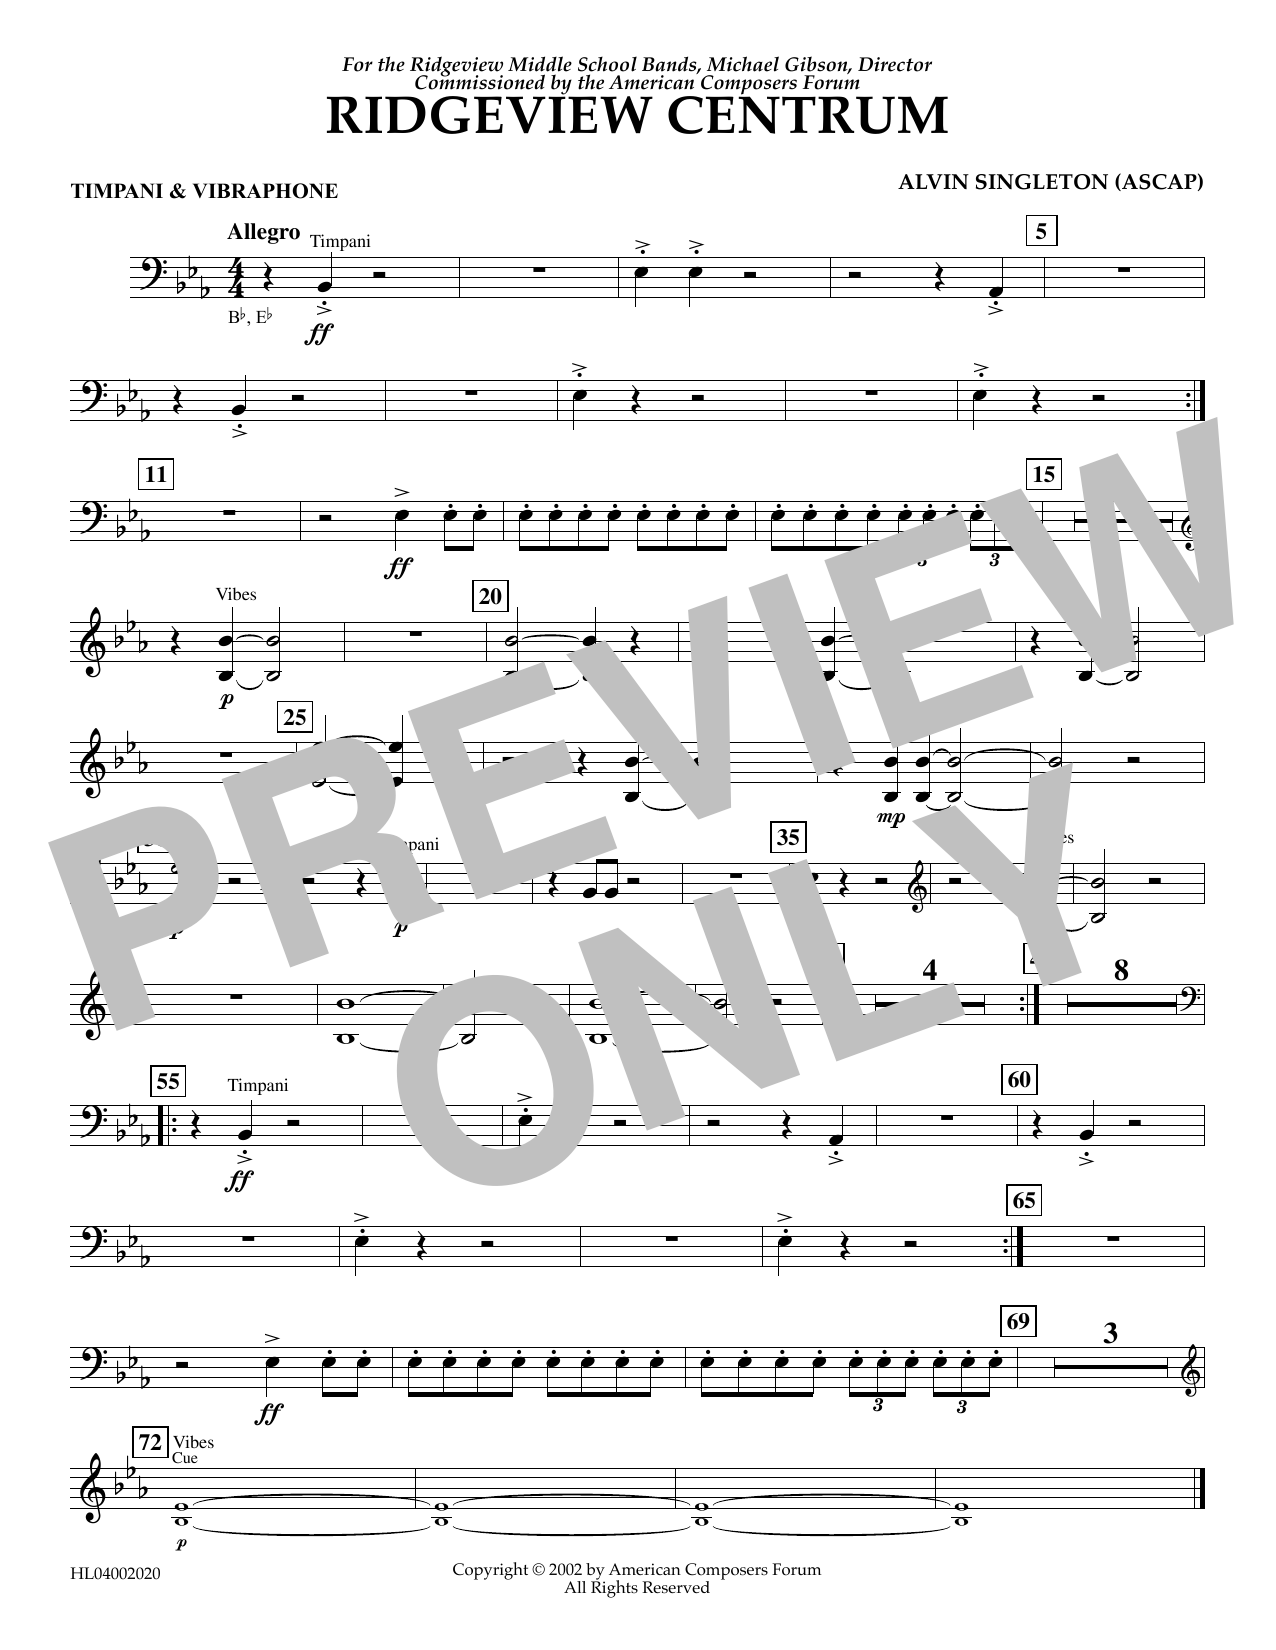 Alvin Singleton Ridgeview Centrum - Timpani, Vibraphone sheet music preview music notes and score for Concert Band including 1 page(s)